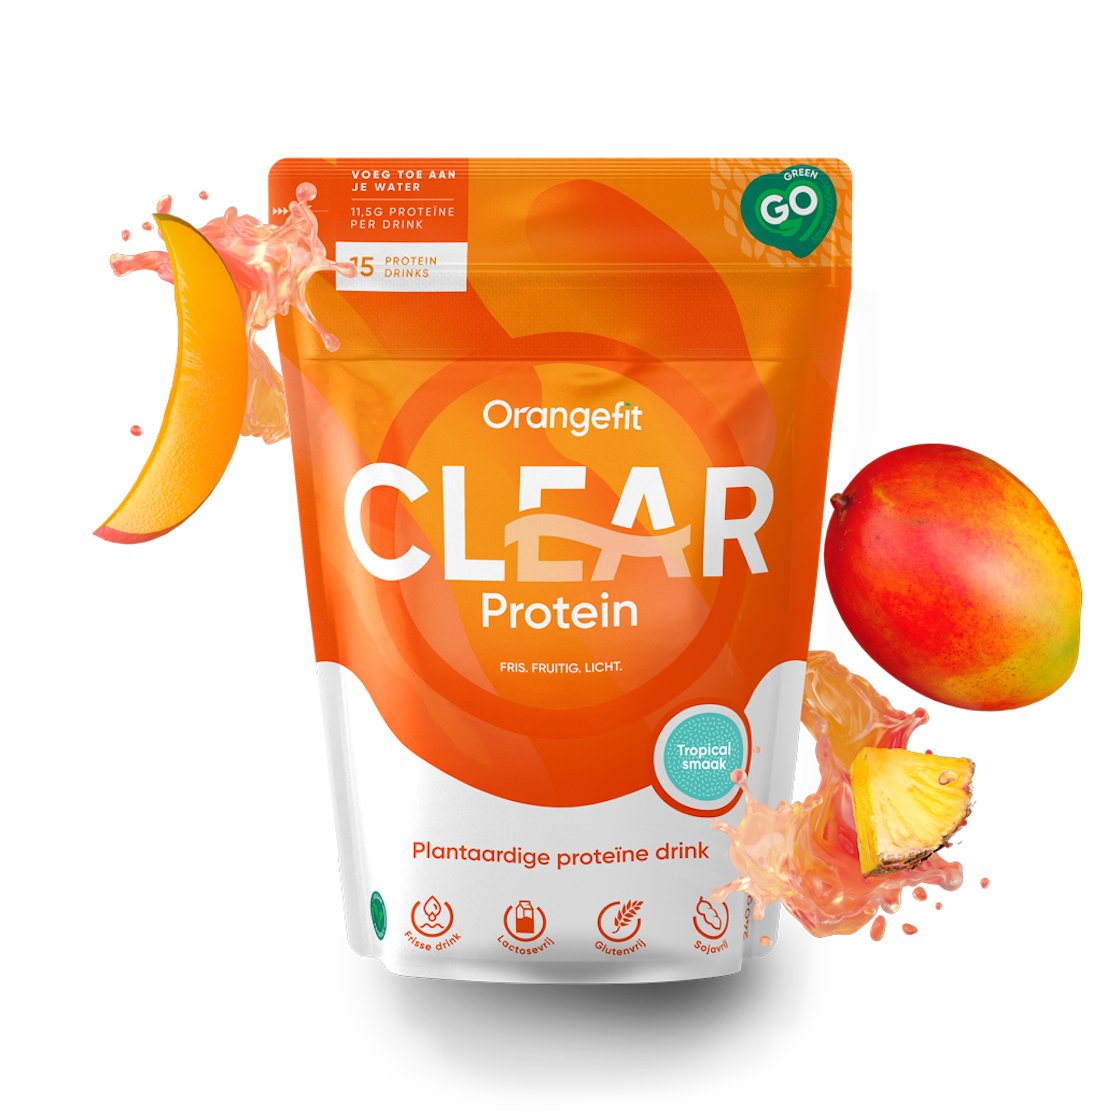 Clear Protein from Orangefit® - Refreshing protein drink